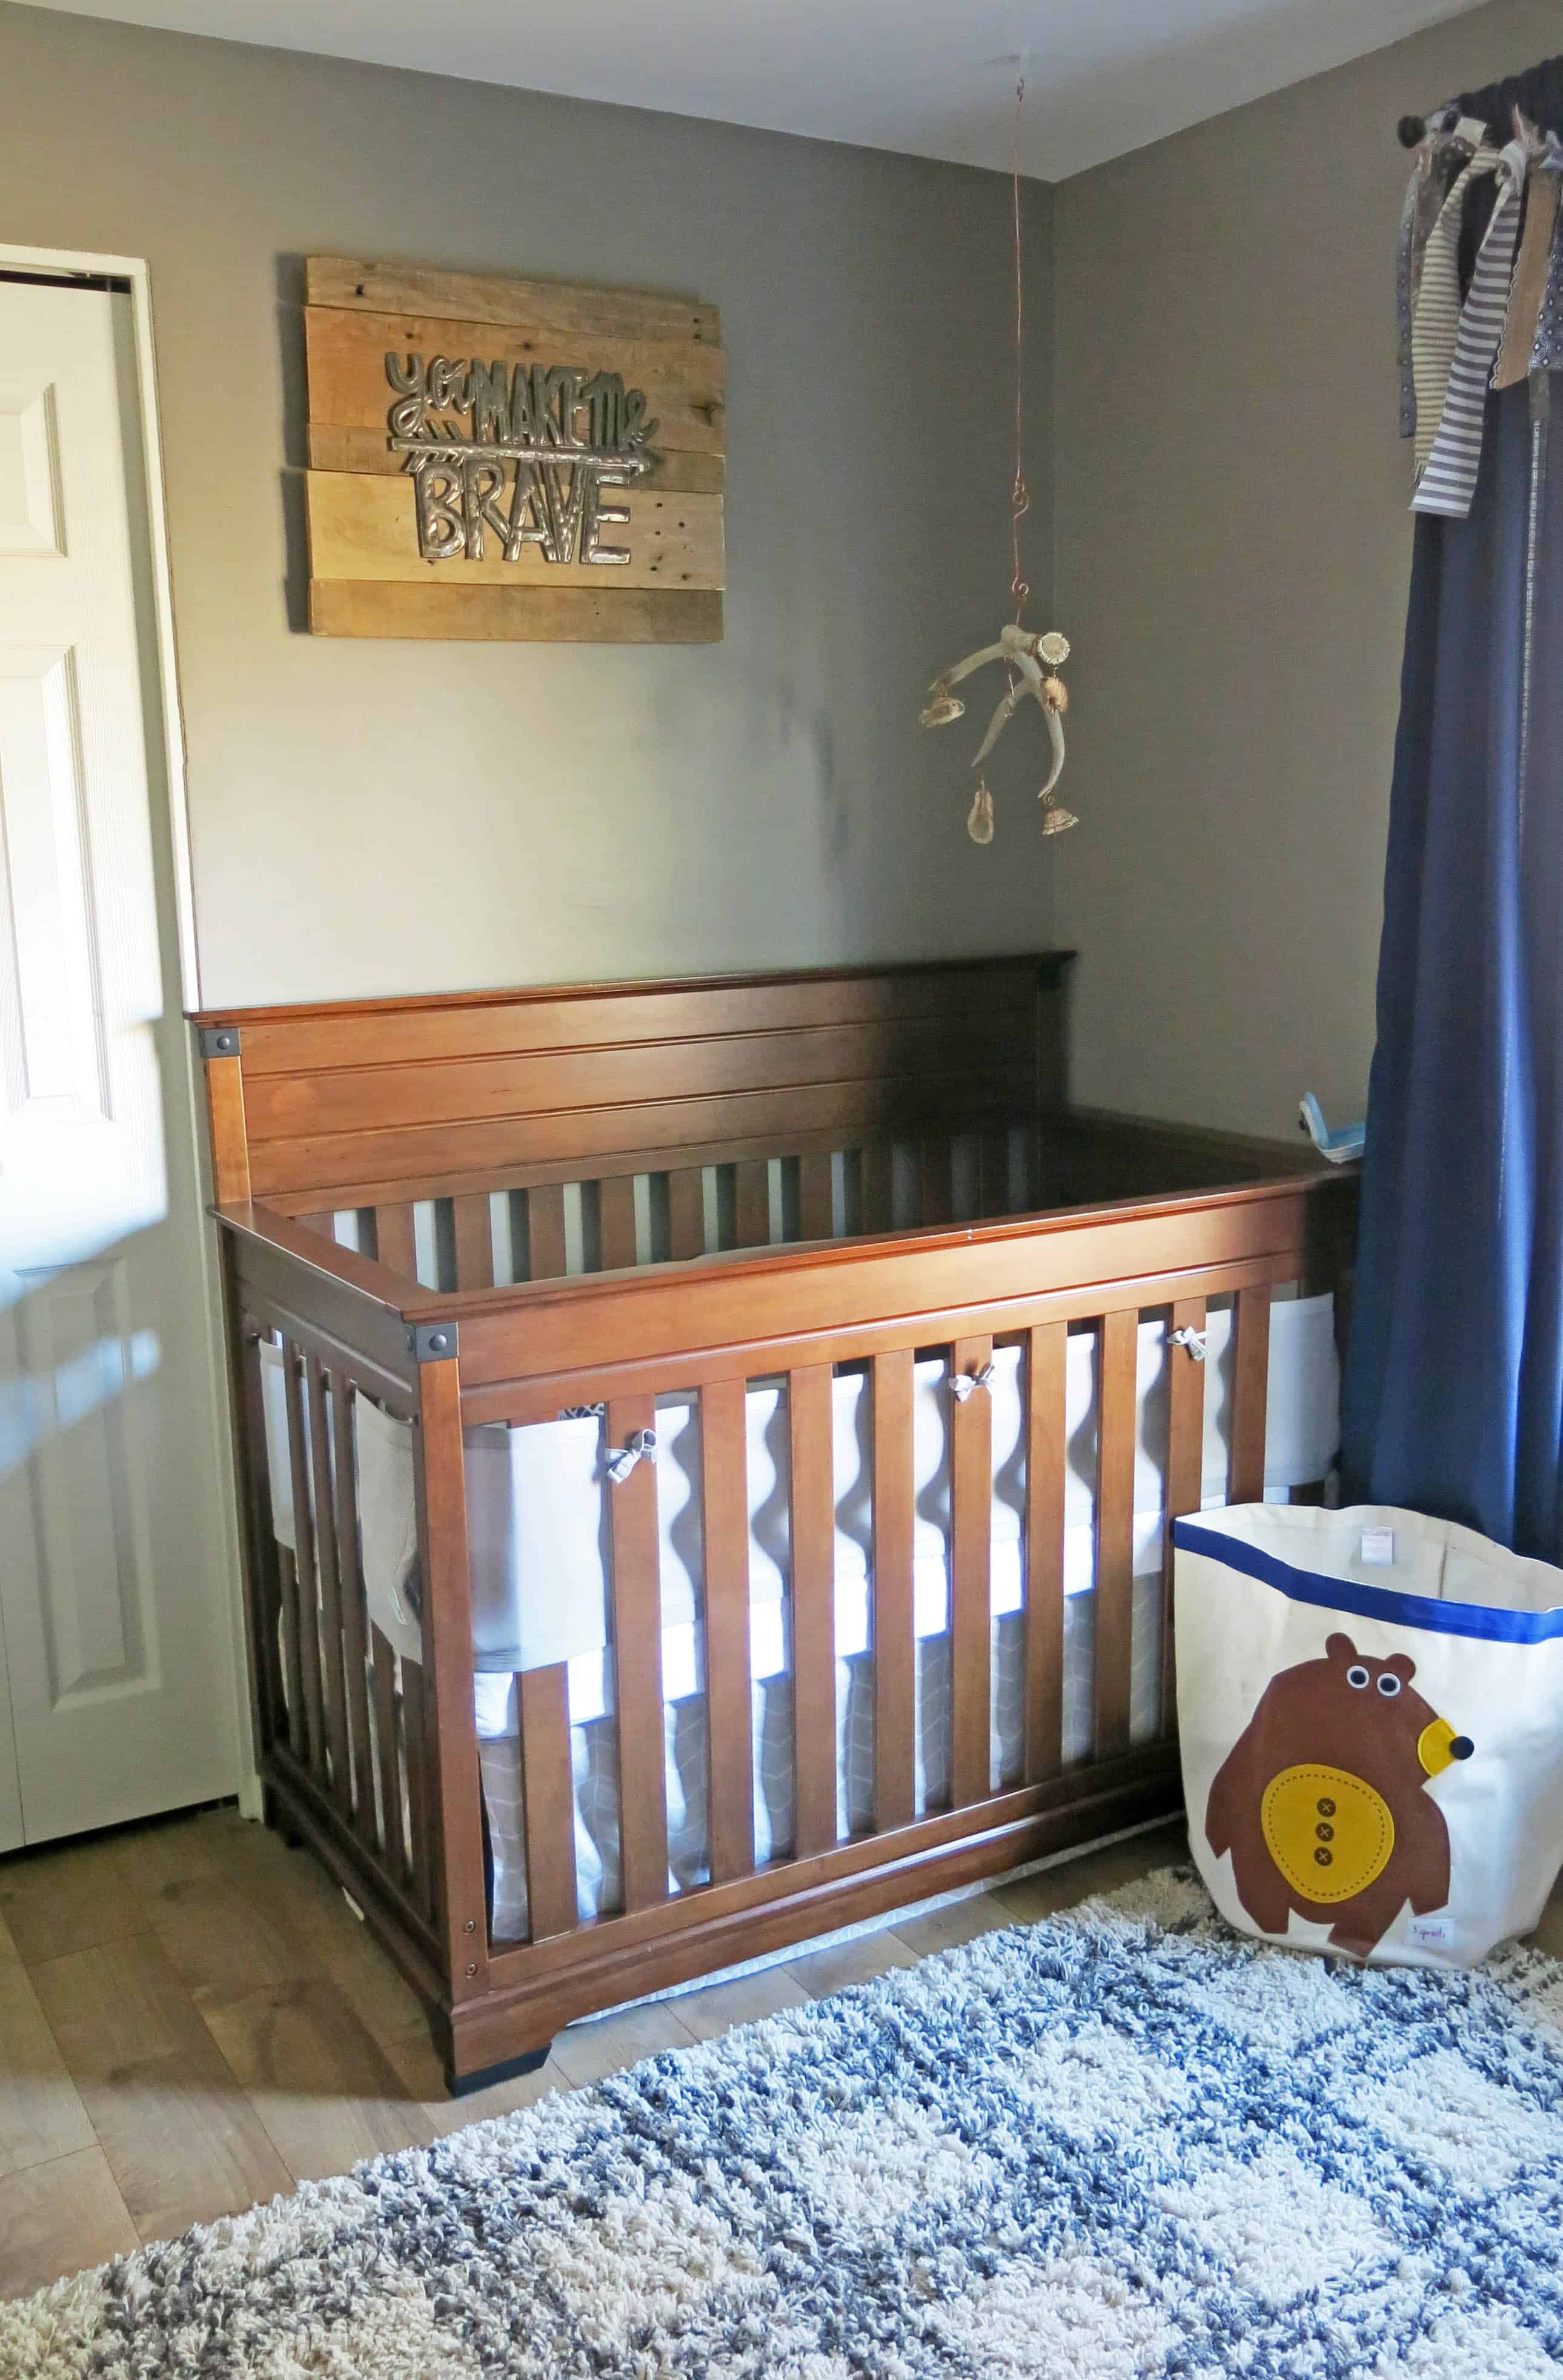 Our boy's woodland animals nursery featured a wooden crib with wood wall art hanging above the crib, and navy blue area rugs and curtains.